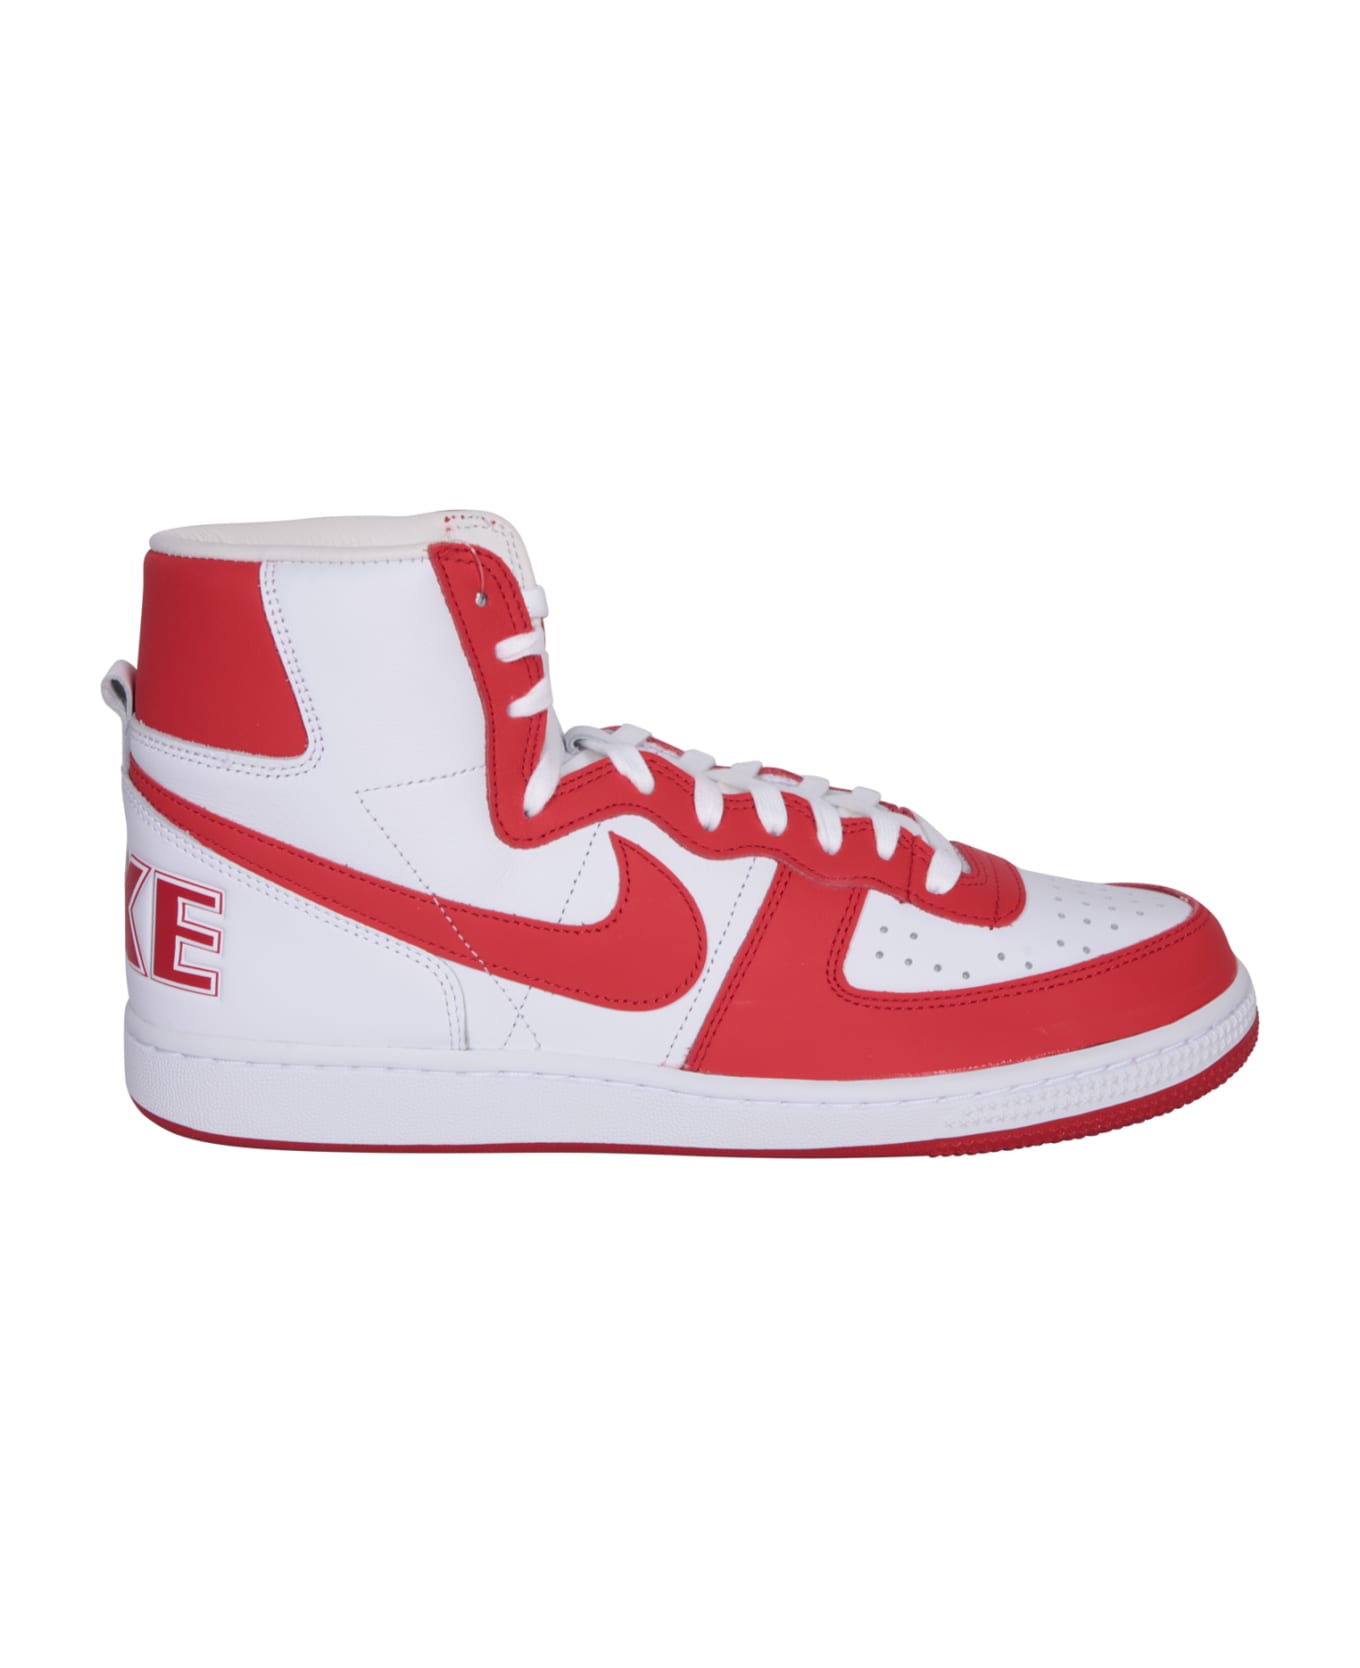 Comme Des Garçons Homme Plus Sneakers High-top Nike Terminator Red/white - Red スニーカー